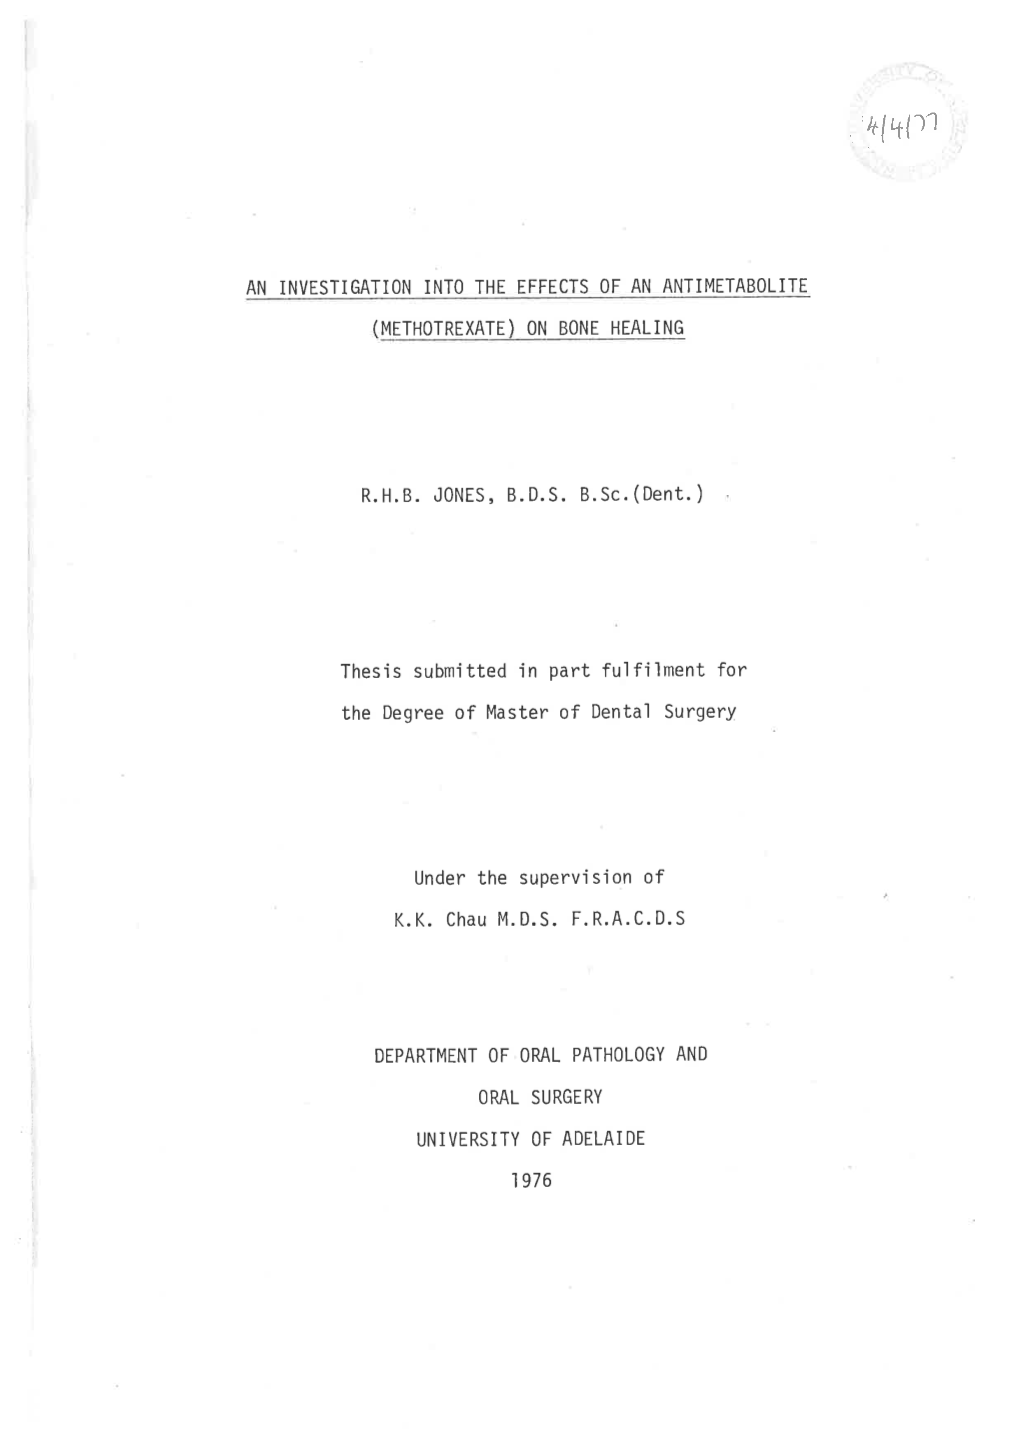 Thesis Submitted in Part Fulfilment for Under the Supervis'ion Of